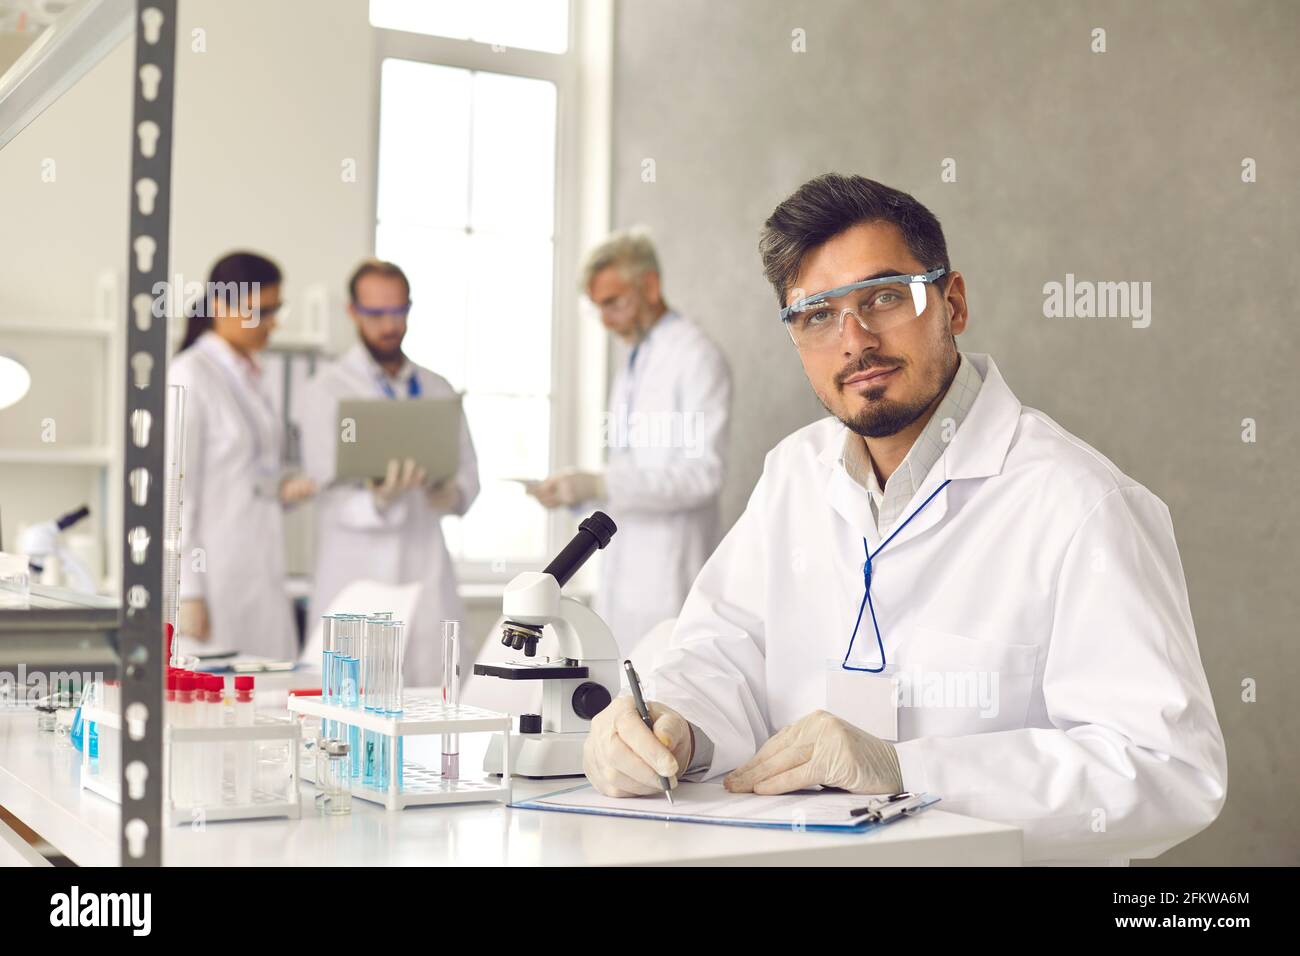 Portrait of man scientist working at laboratory making experiment conclusion Stock Photo